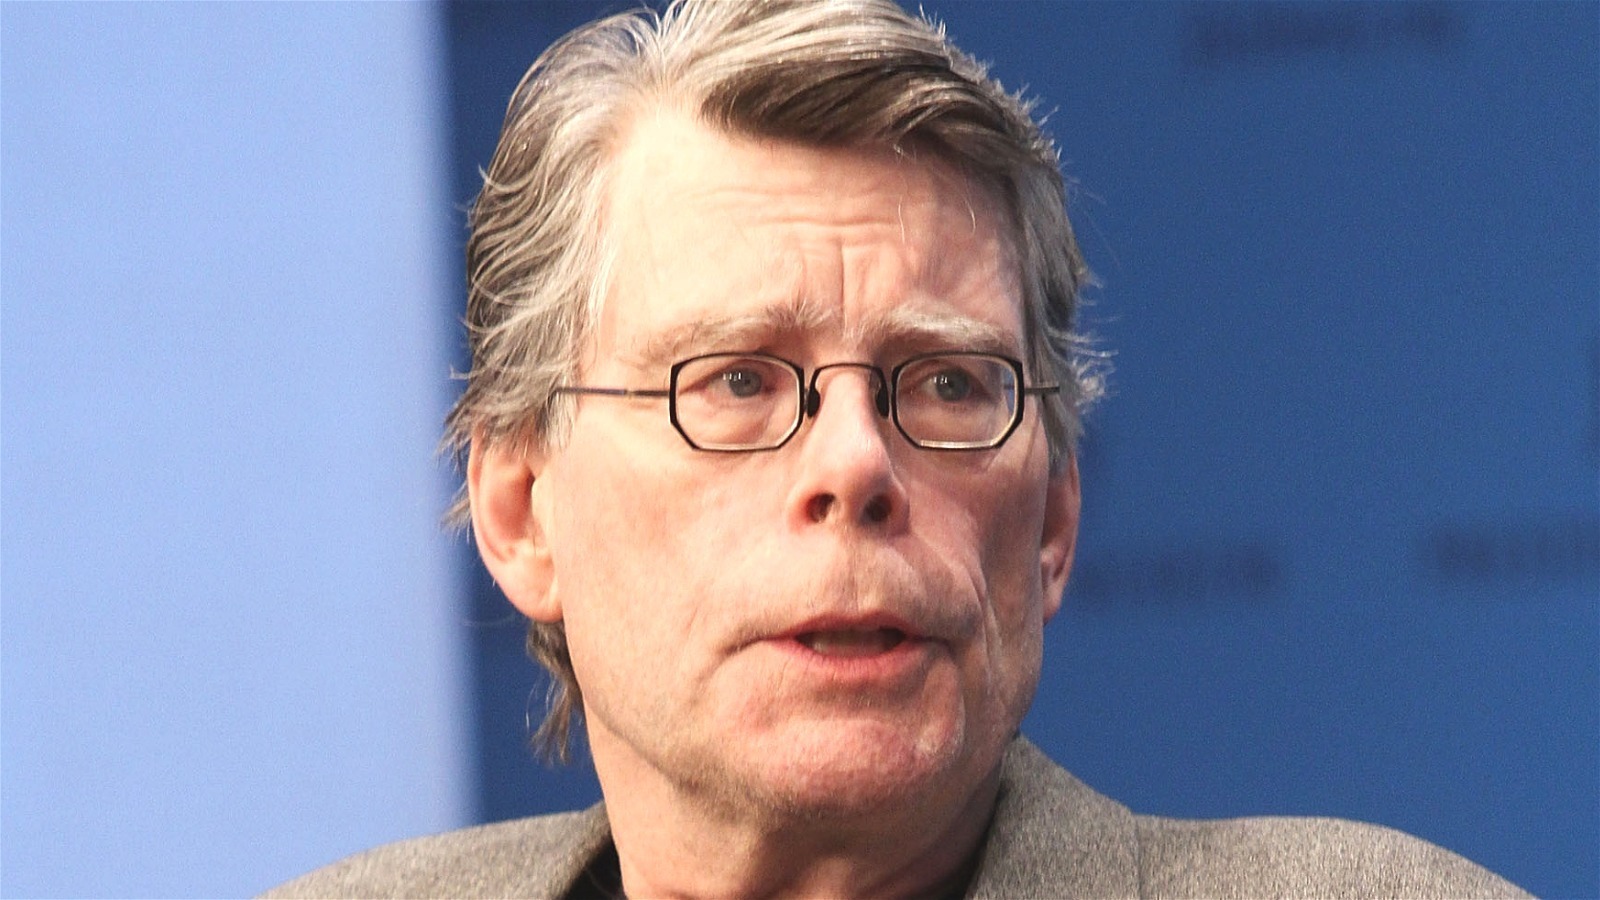 Stephen King 'Billy Summers' Interview 2021 - Stephen King on How He Wrote  His Latest Novel